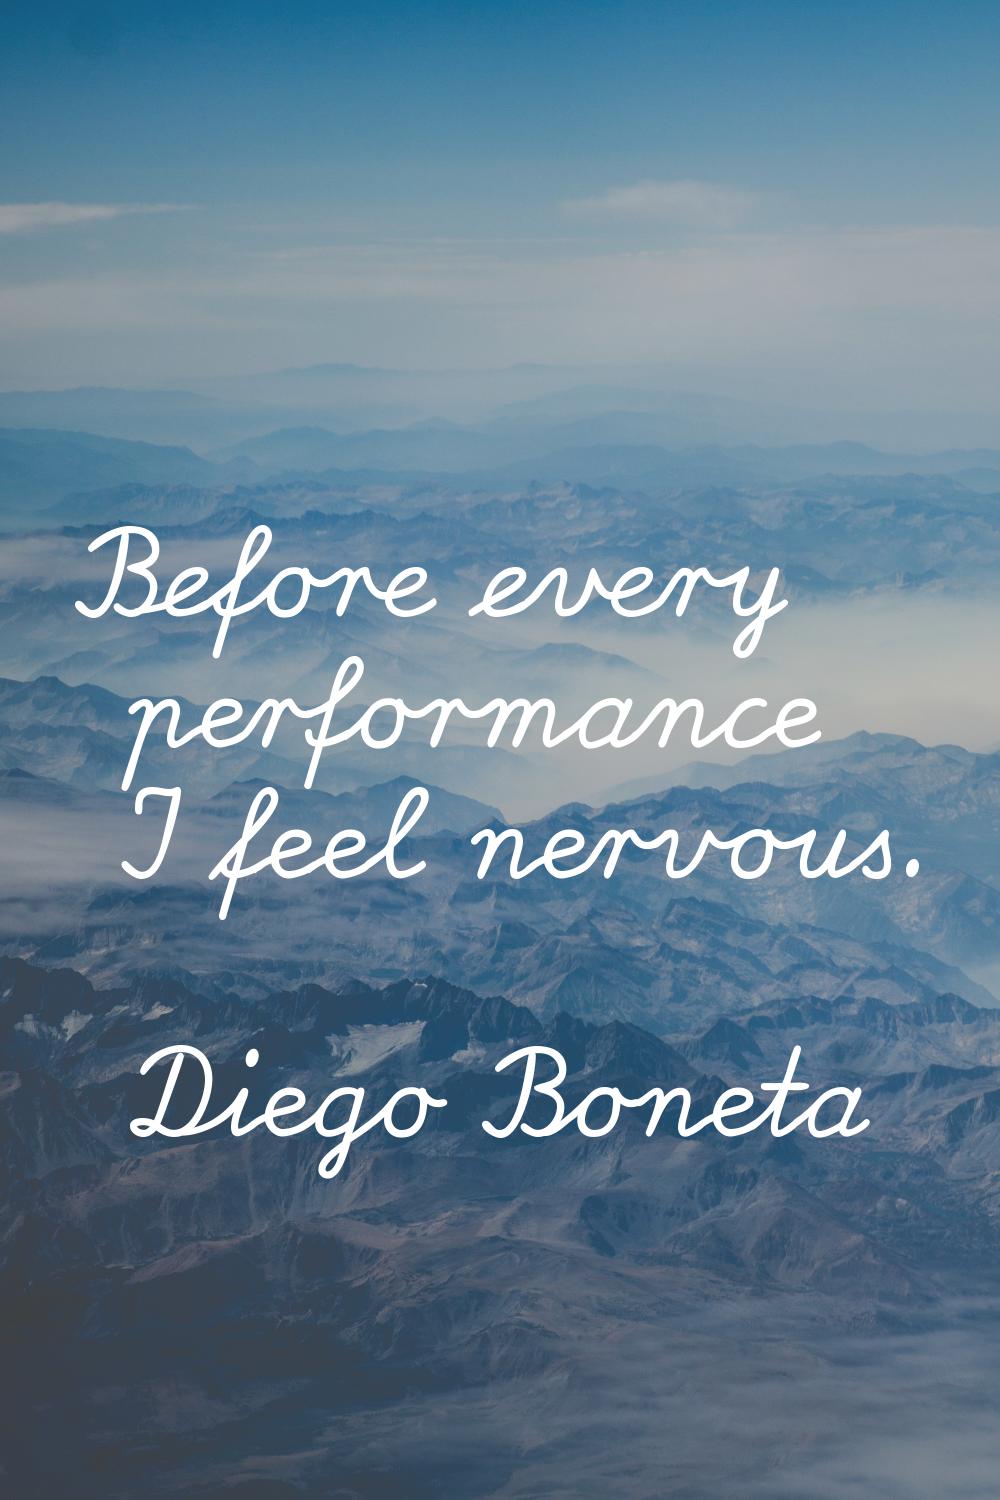 Before every performance I feel nervous.